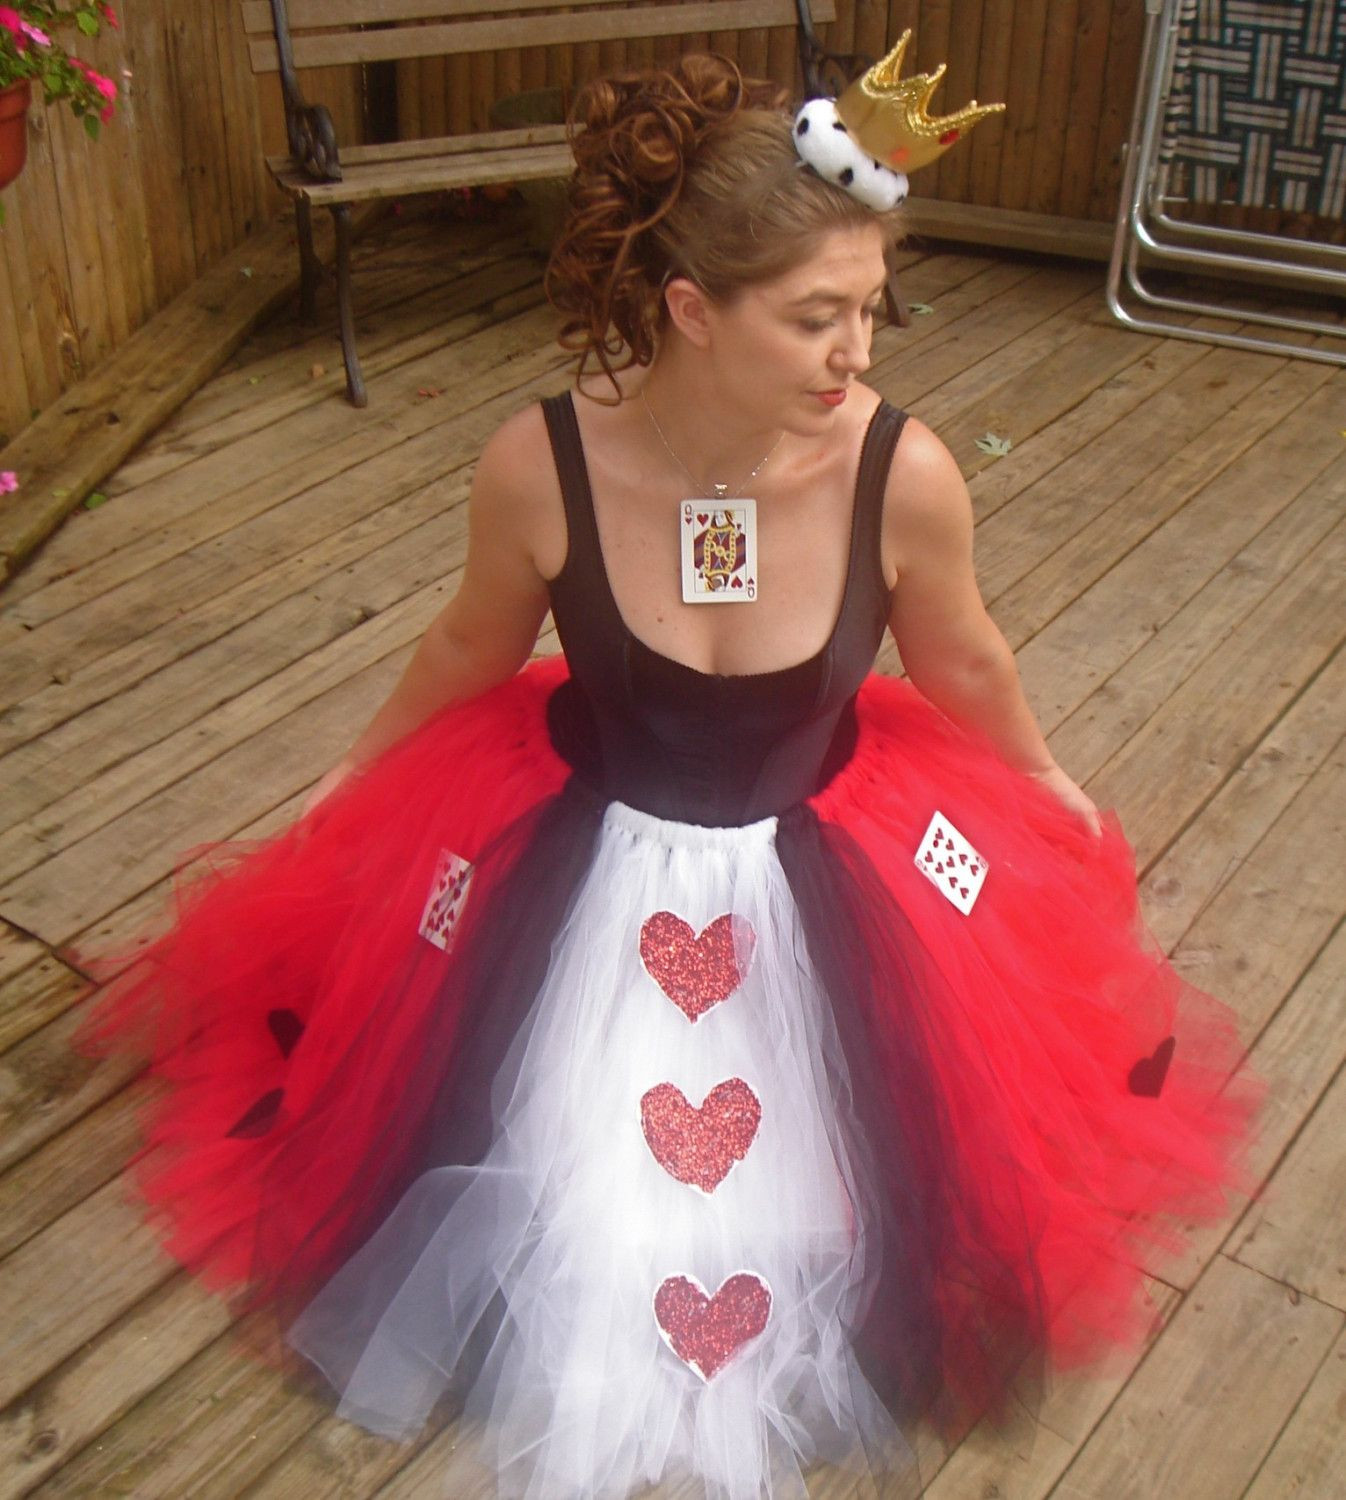 Tutu Skirt For Adults DIY
 Queen of Hearts Adult Boutique Tutu Skirt Costume